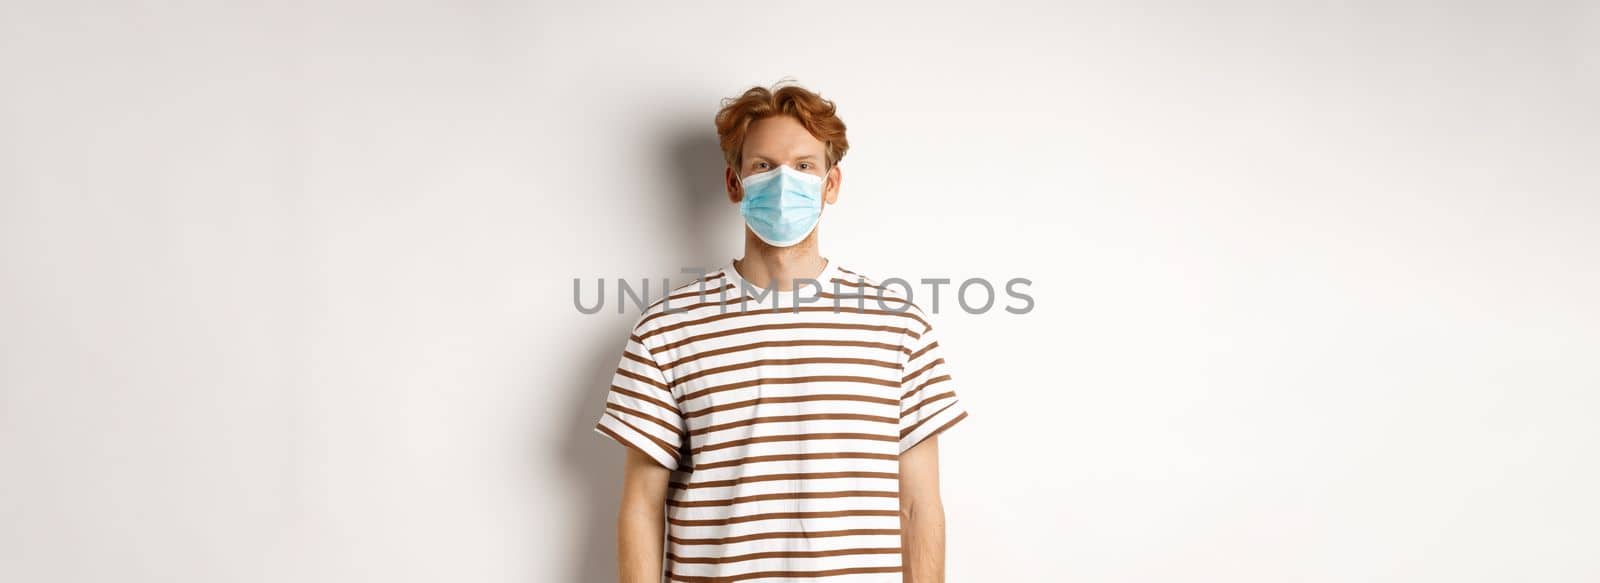 Covid-19, pandemic and social distancing concept. Young man with red hair wearing medical mask to prevent catching coronavirus, white background by Benzoix